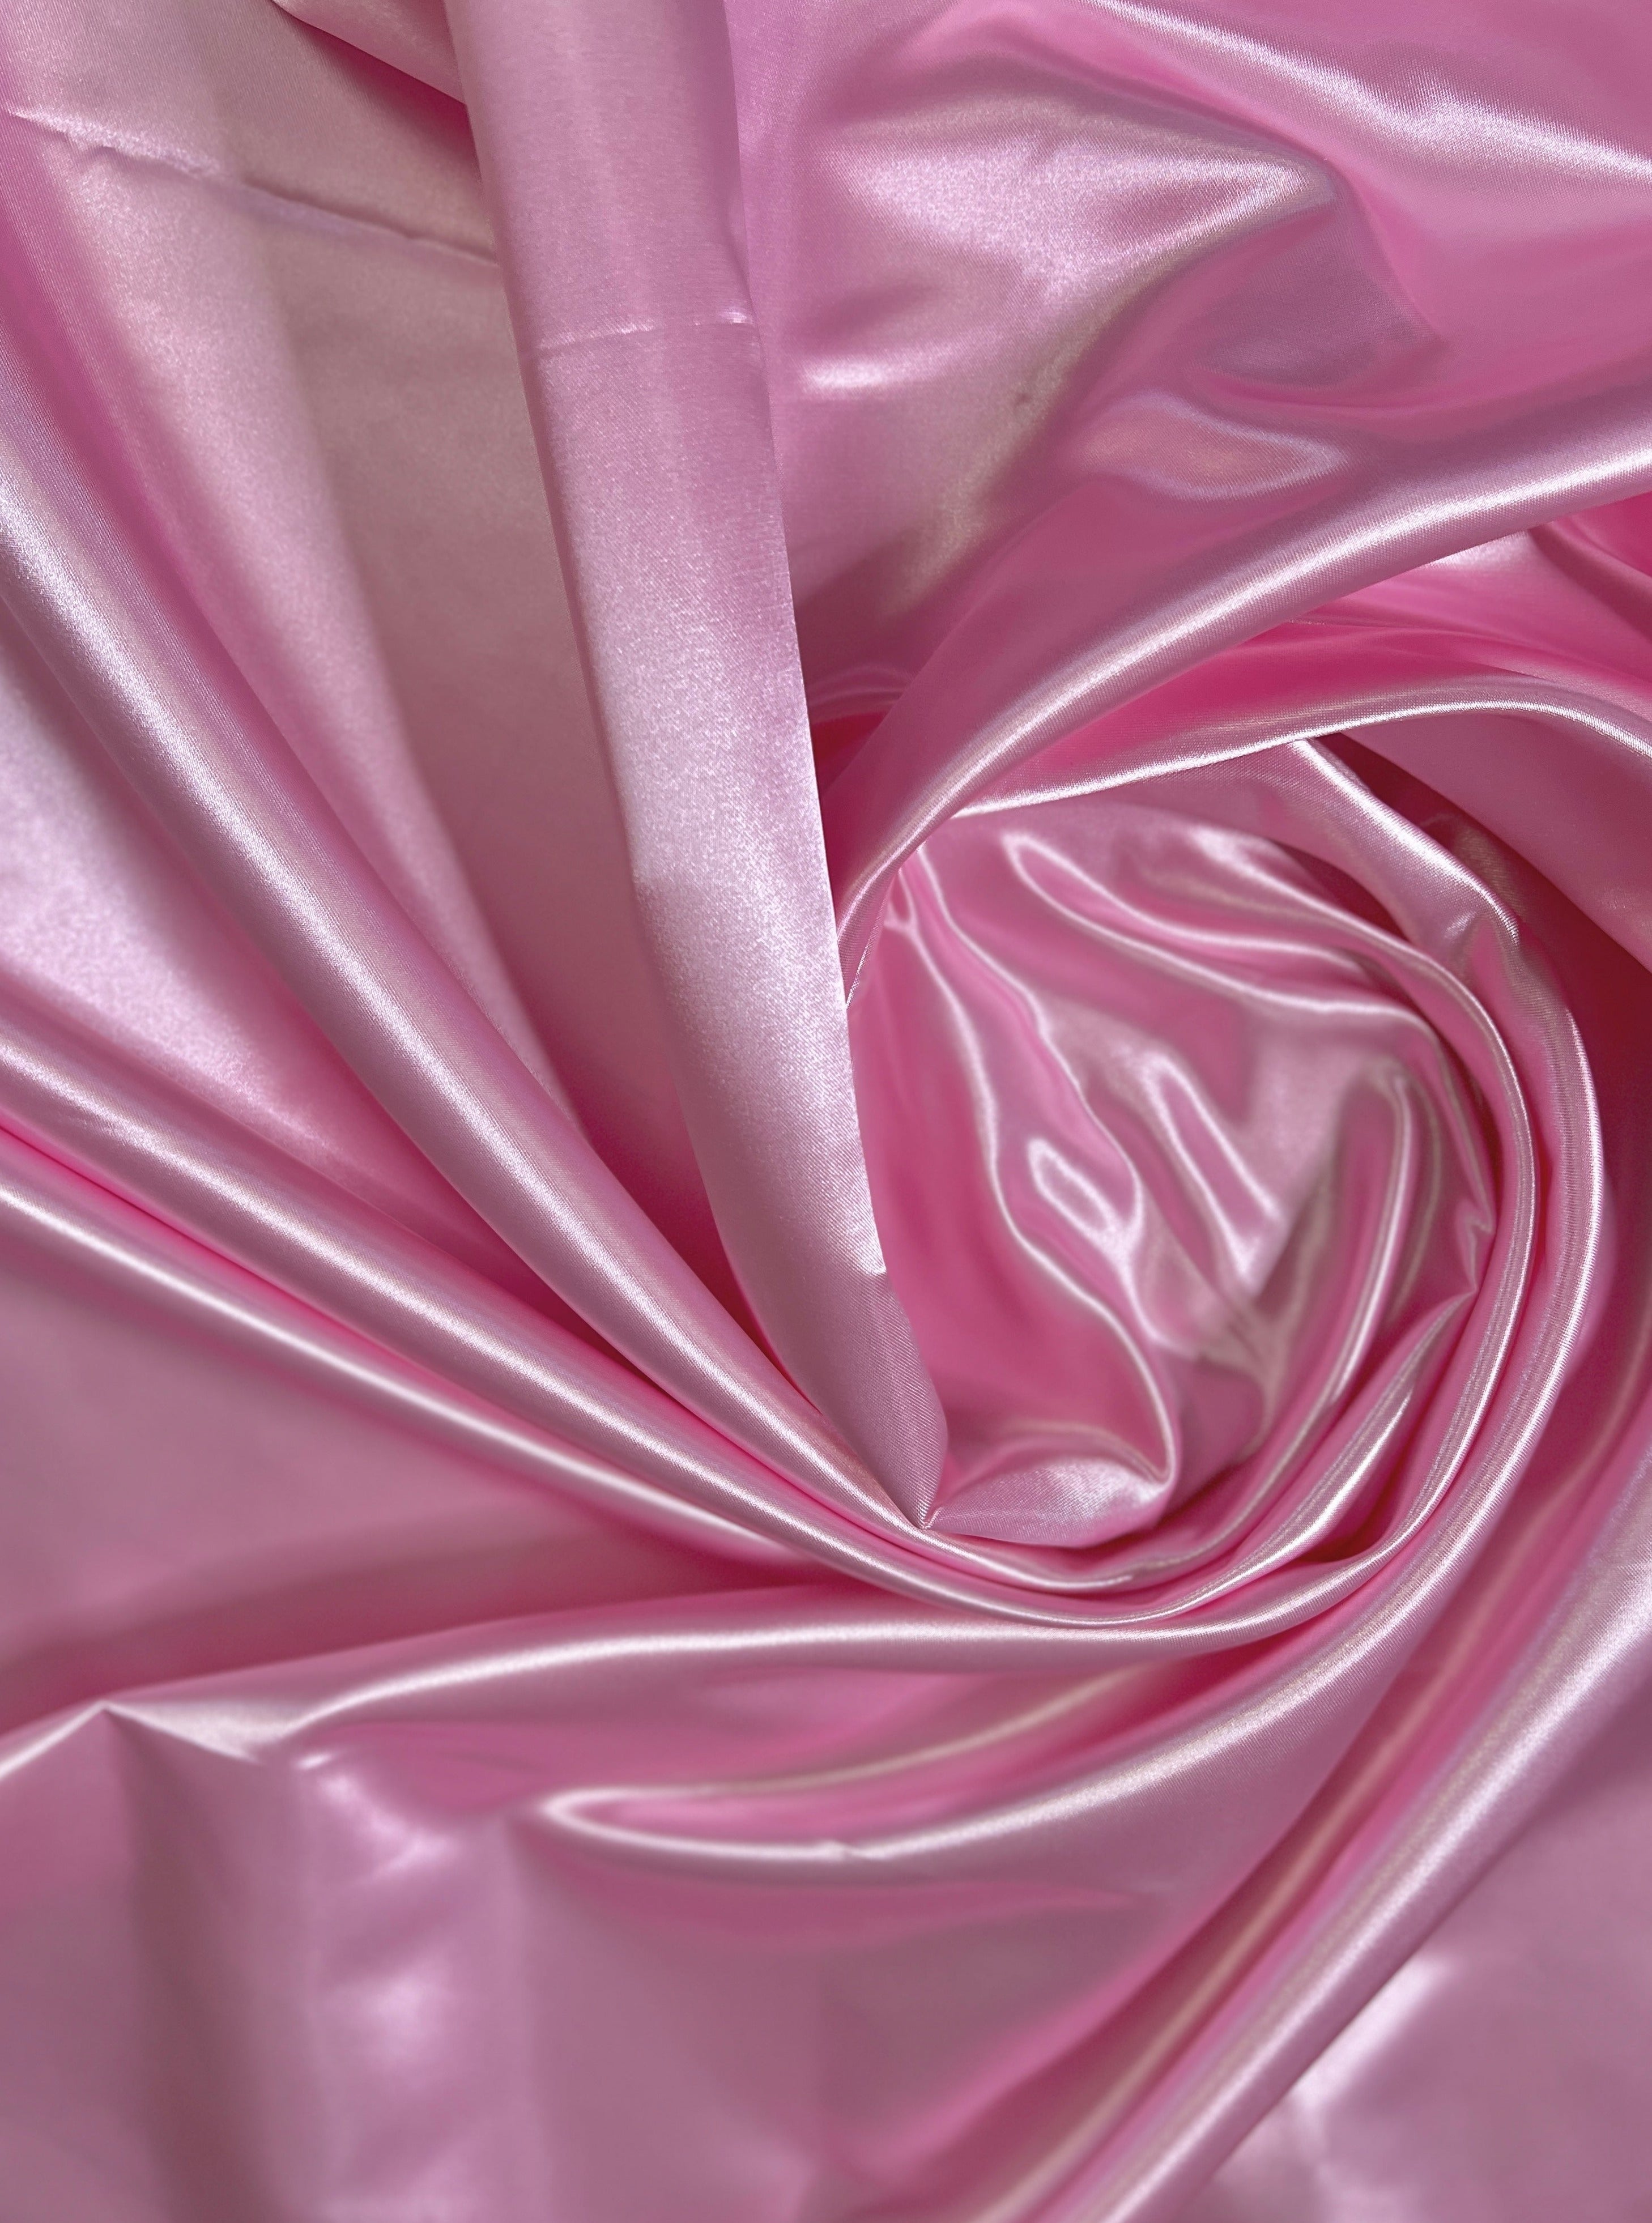 Pink Duchesse Satin Fabric, Pink Bridal Shiny Satin by yard, Light Pink Heavy Satin Fabric for Wedding Dress, pink for woman, best satin, premium satin, cheap satin, luxury satin, satin usa, satin los angelos,best quality satin